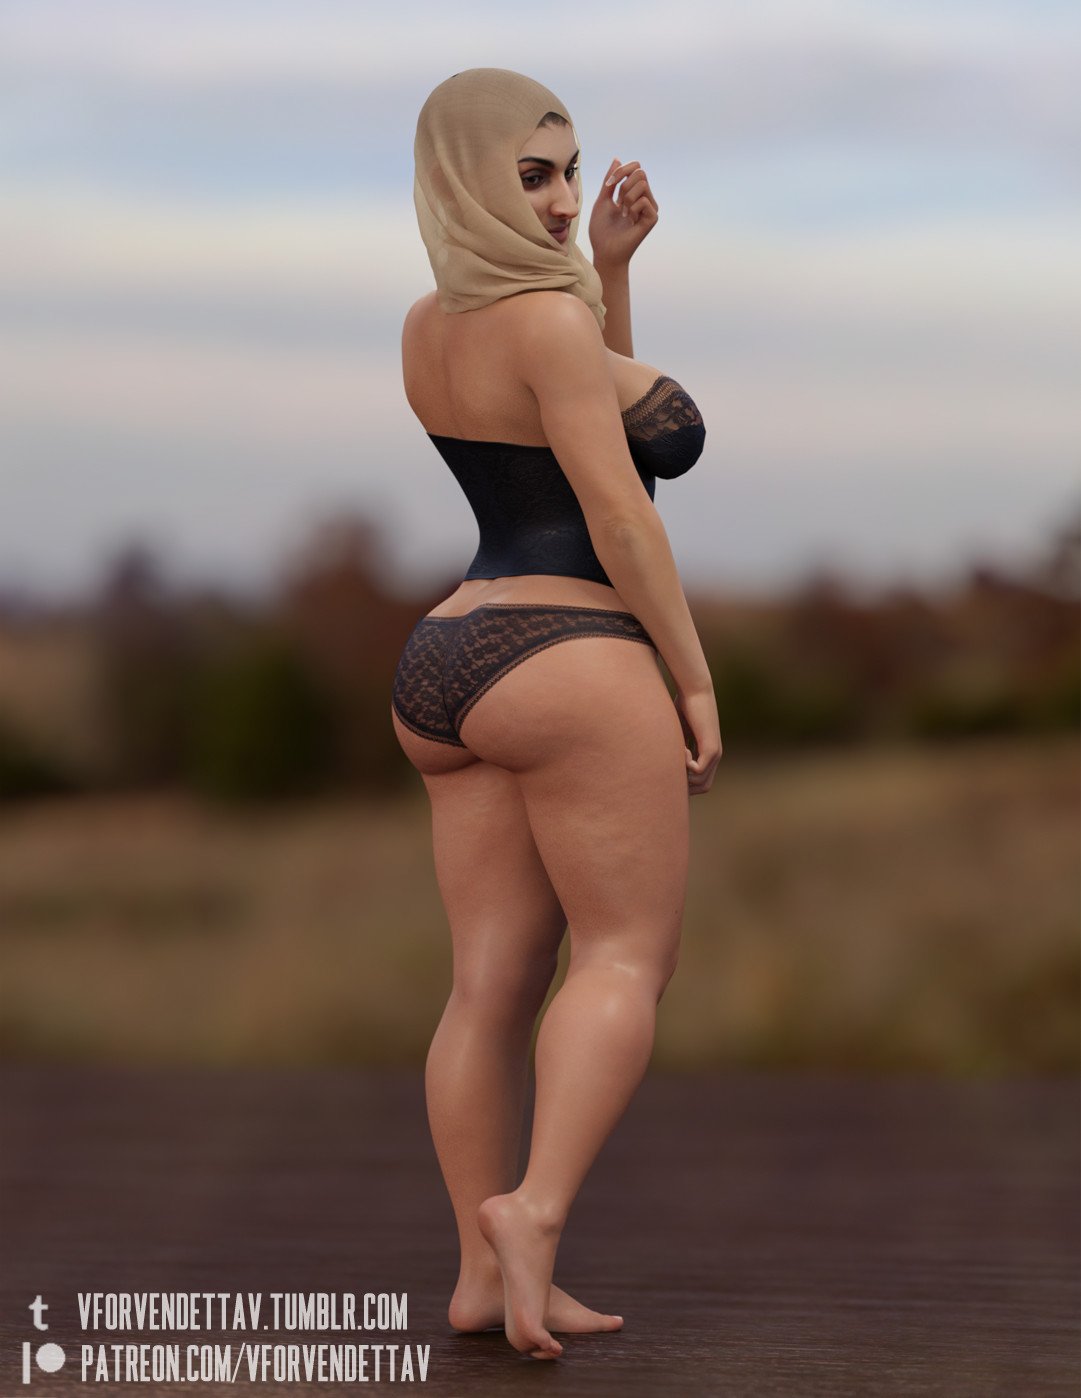 Big ass muslim girls in hijab: your search for perfection is over!